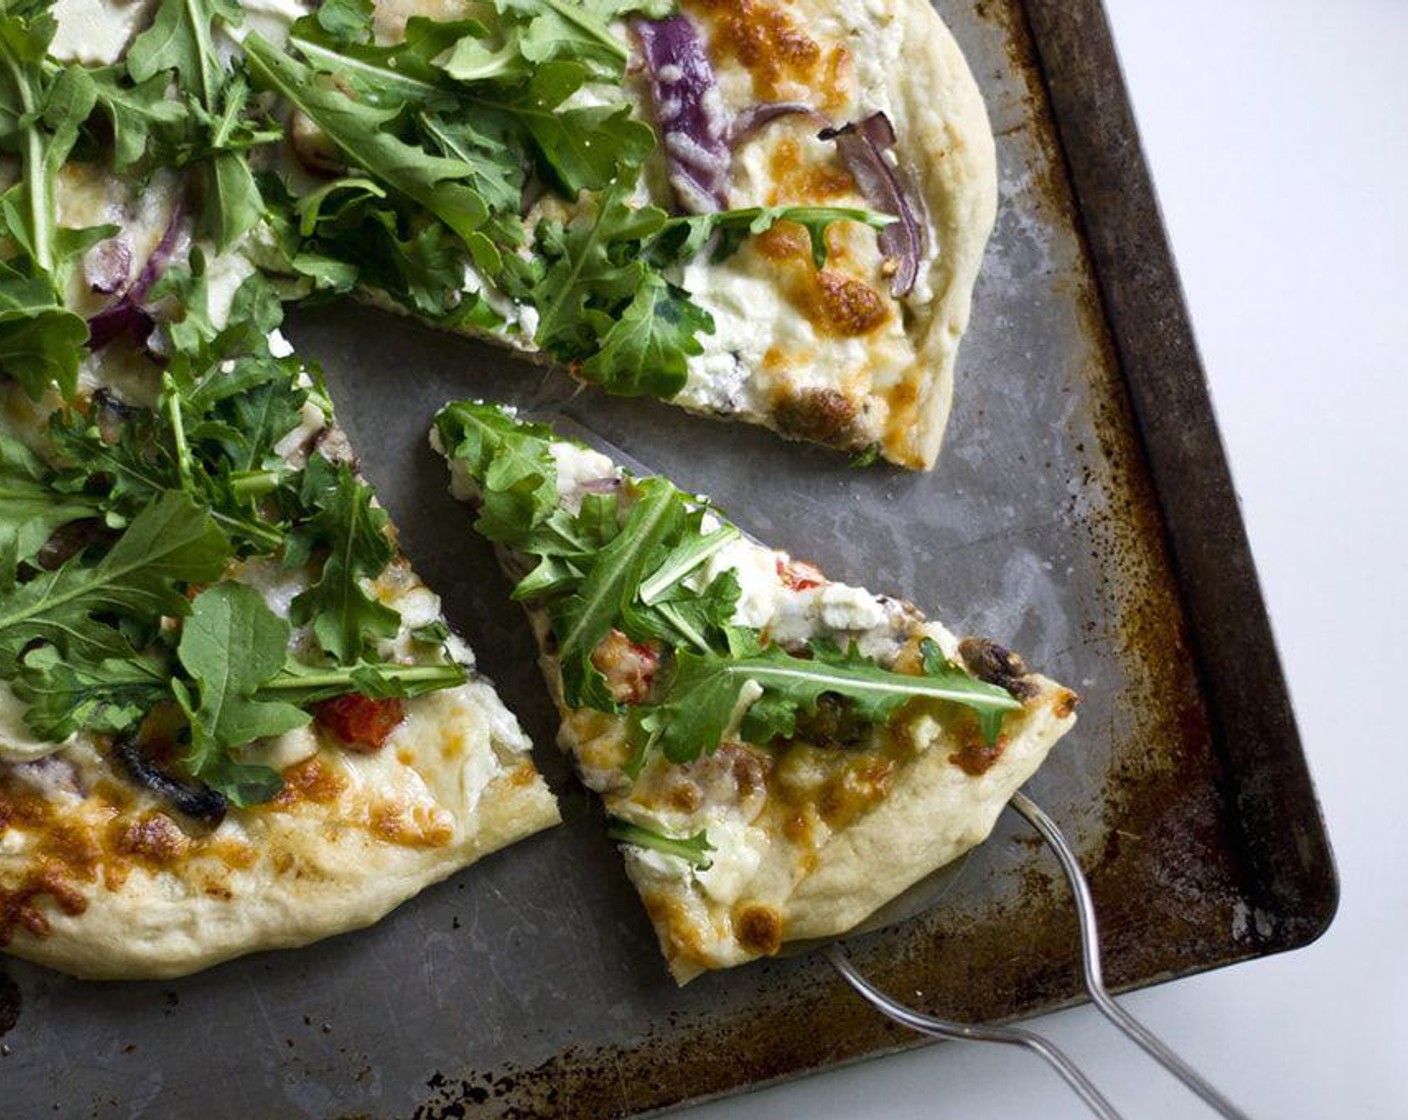 Goat Cheese Pizza with Arugula and White Sauce